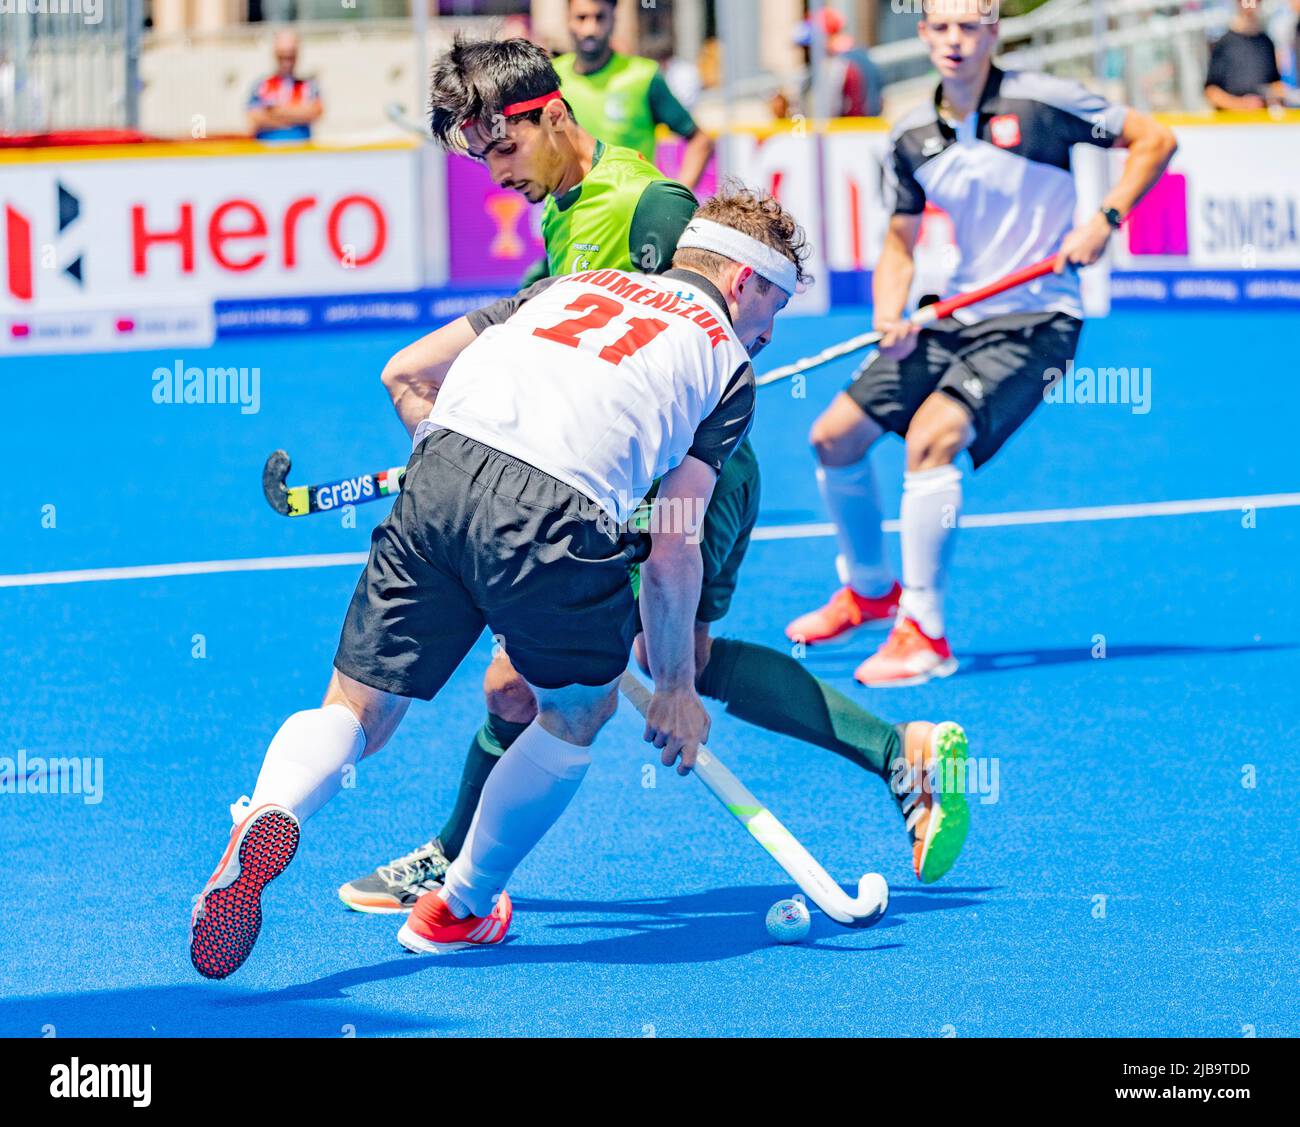 Lausanne Switzerland, 4th May 2022:  Jakub Chumeńczuk of Poland (21) is in action during FIH Hockey5S Lausanne 2022. Credit: Eric Dubost/Alamy Live News. Stock Photo